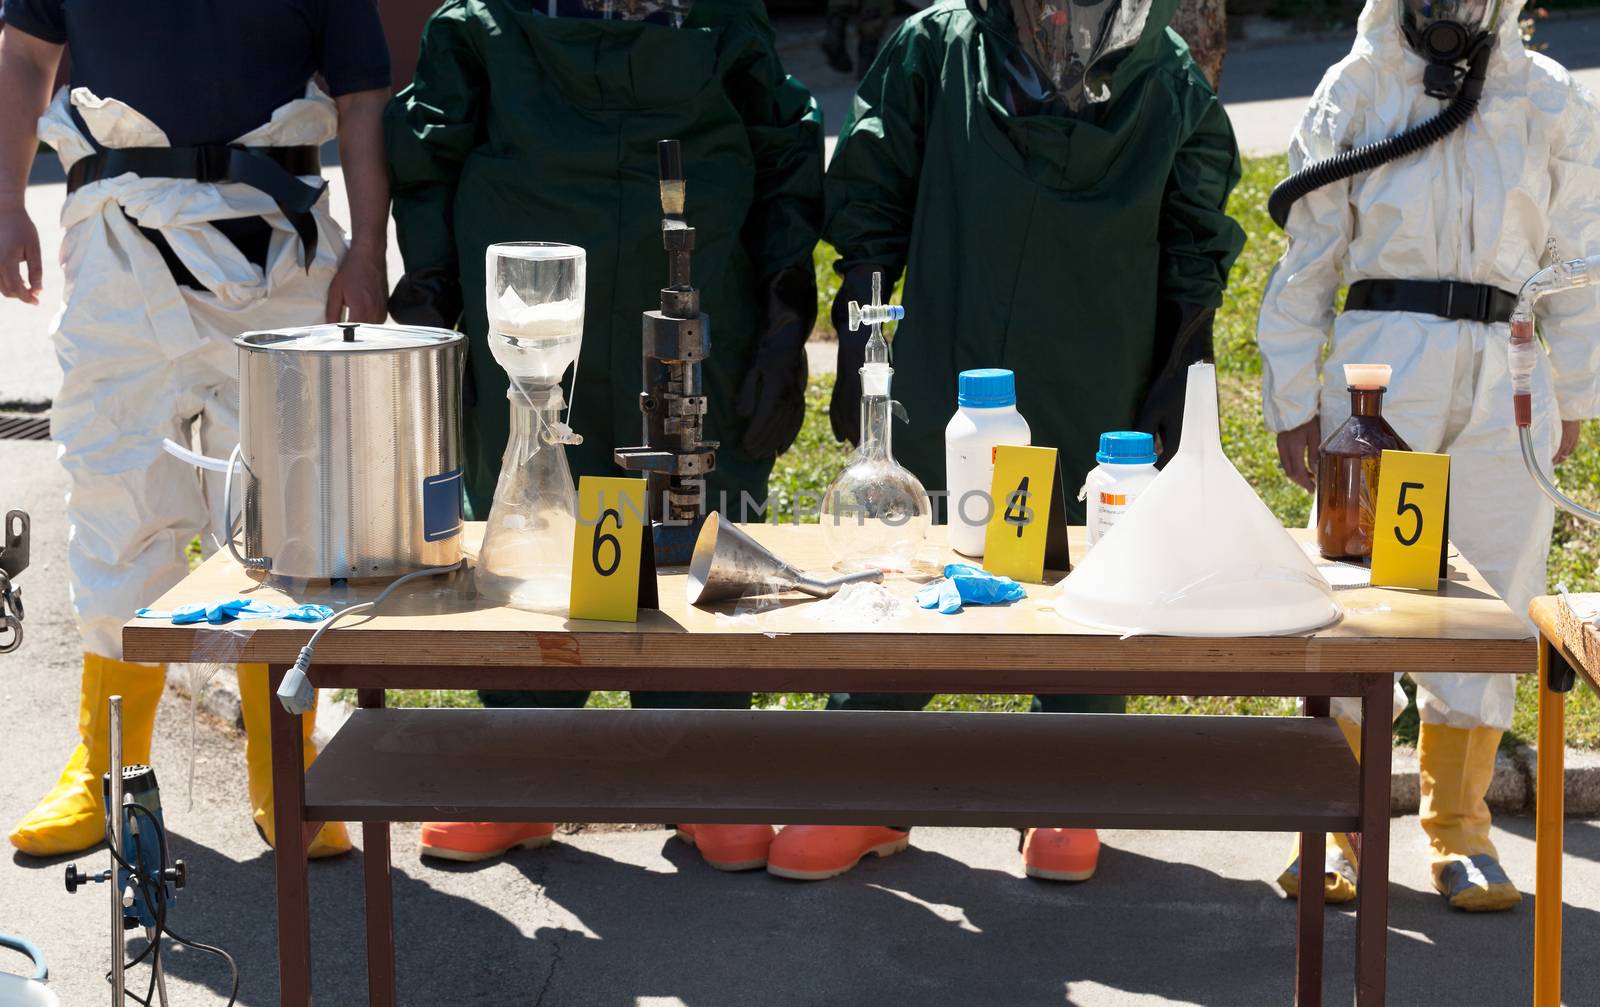 Drug enforcement team uncovers meth lab by wellphoto